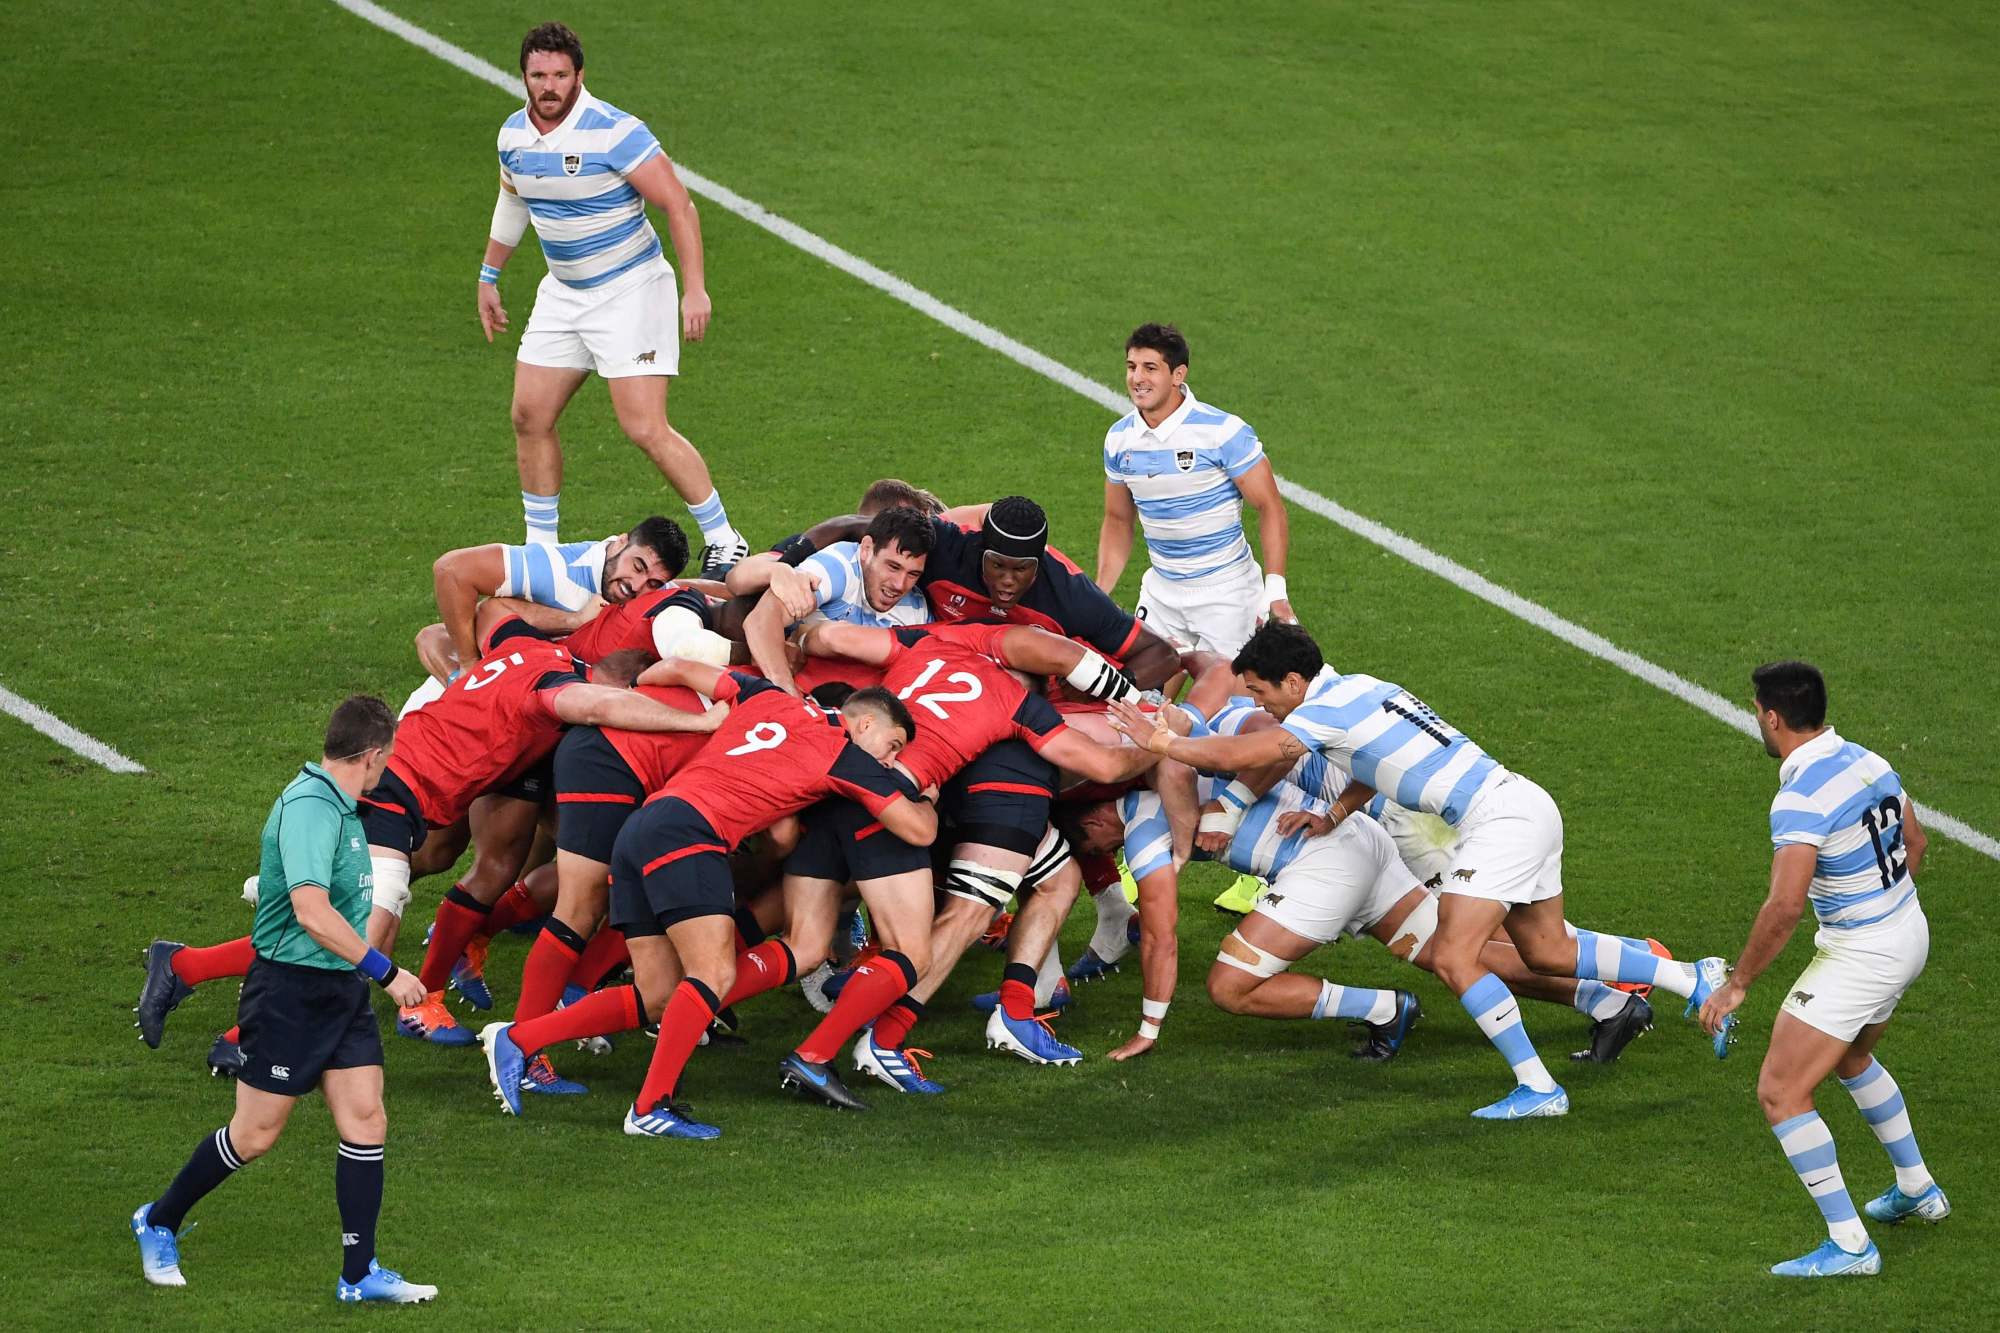 England whips Argentina, becomes first team to secure spot in RWC quarterfinals